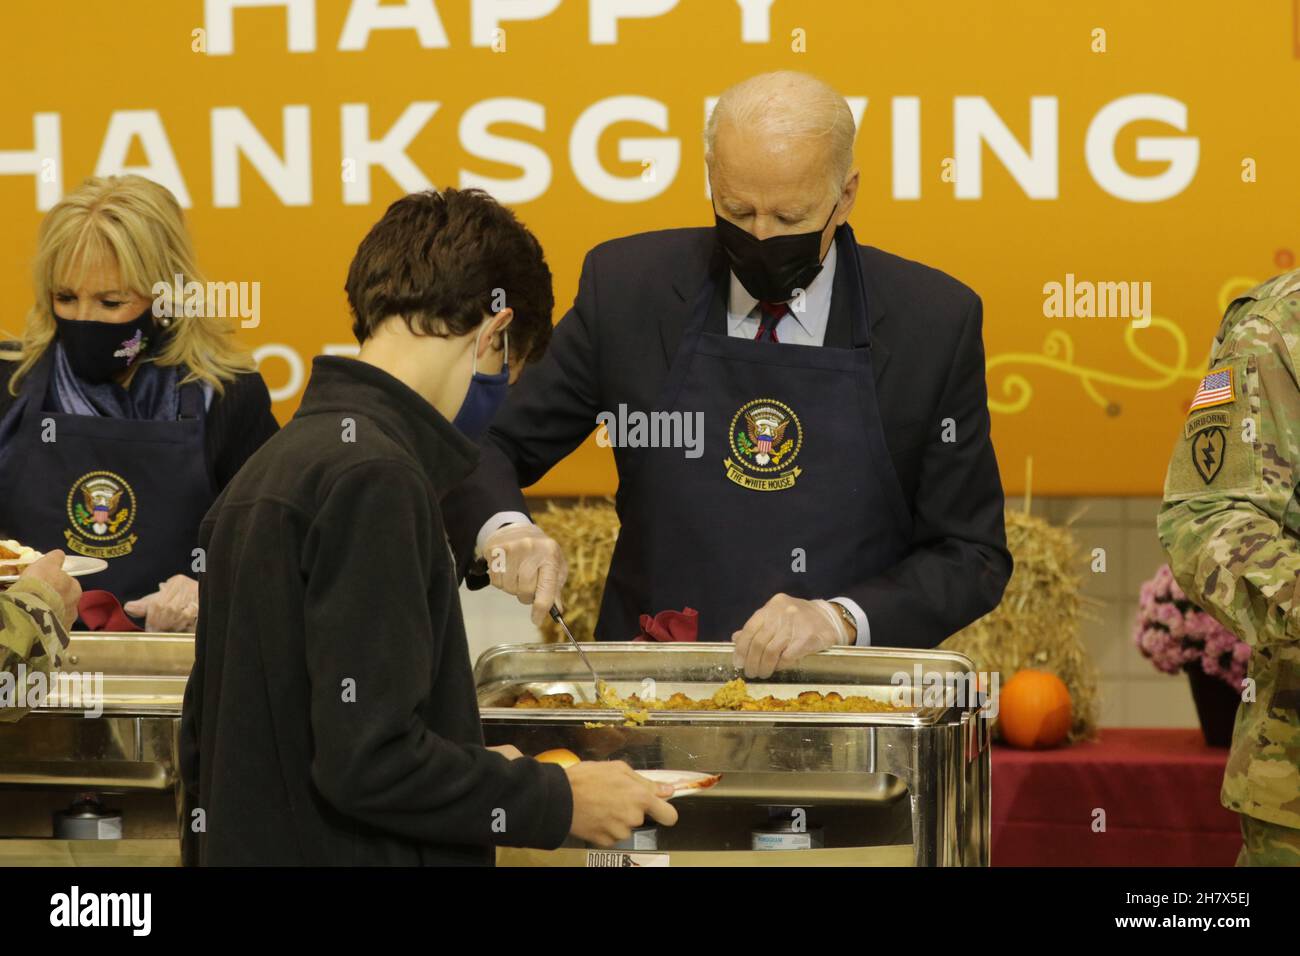 Fort Bragg, United States of America. 23 November, 2021. U.S President Joe Biden and First Lady Jill Biden serve turkey dinner to celebrate an early Thanksgiving with service members at Fort Bragg November 22, 2021, in Fort Bragg, North Carolina. Credit: Spc. Casey Brumbach/U.S. Army/Alamy Live News Stock Photo